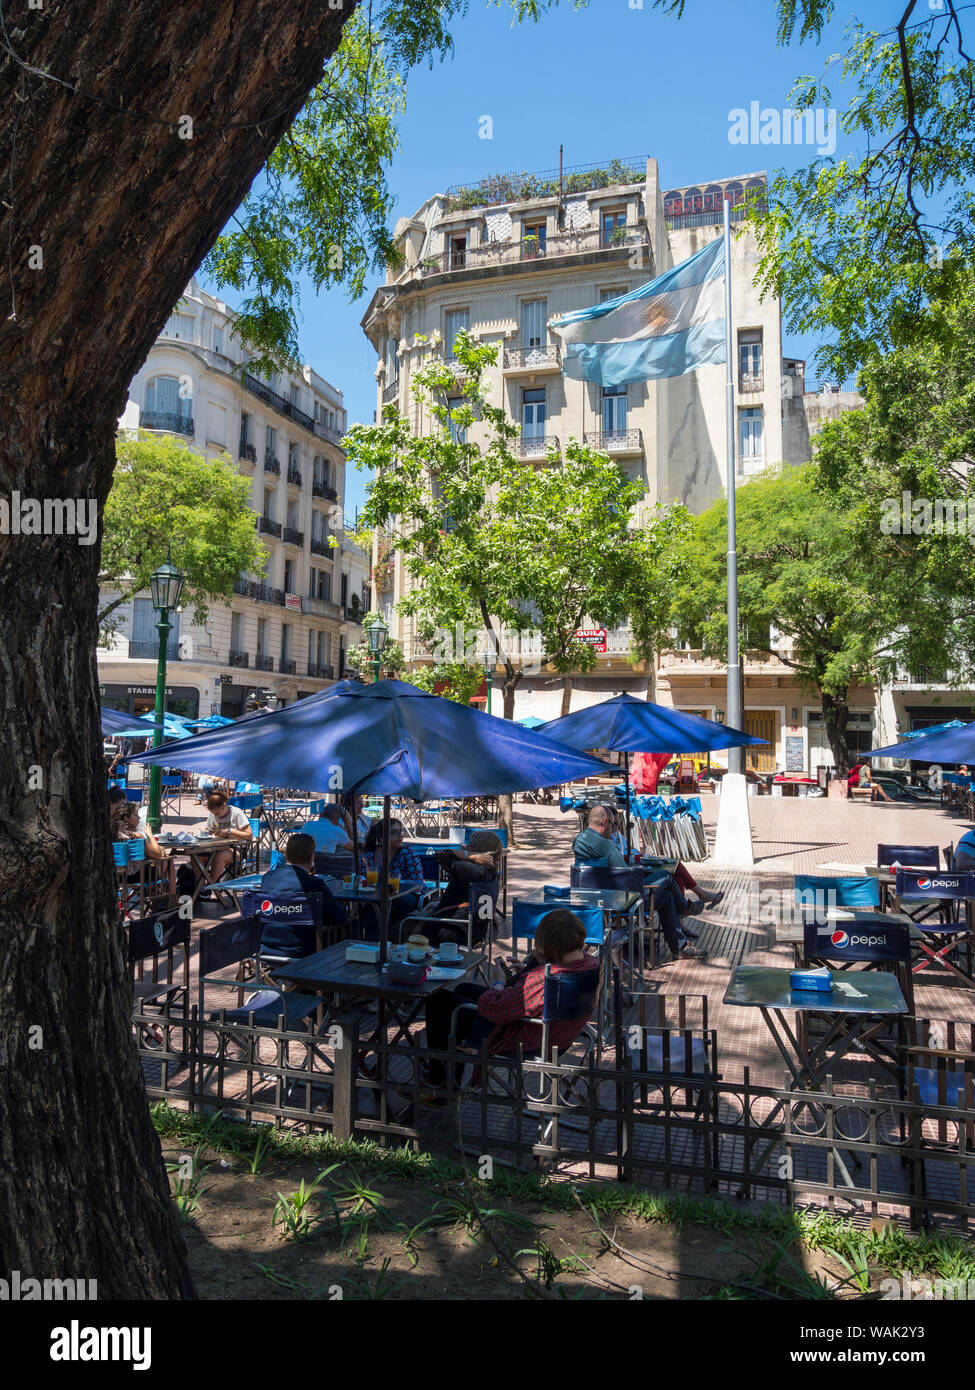 Plaza Dorrego in San Telmo, Buenos Aires, Argentina. (Editorial Use Only) Stock Photo